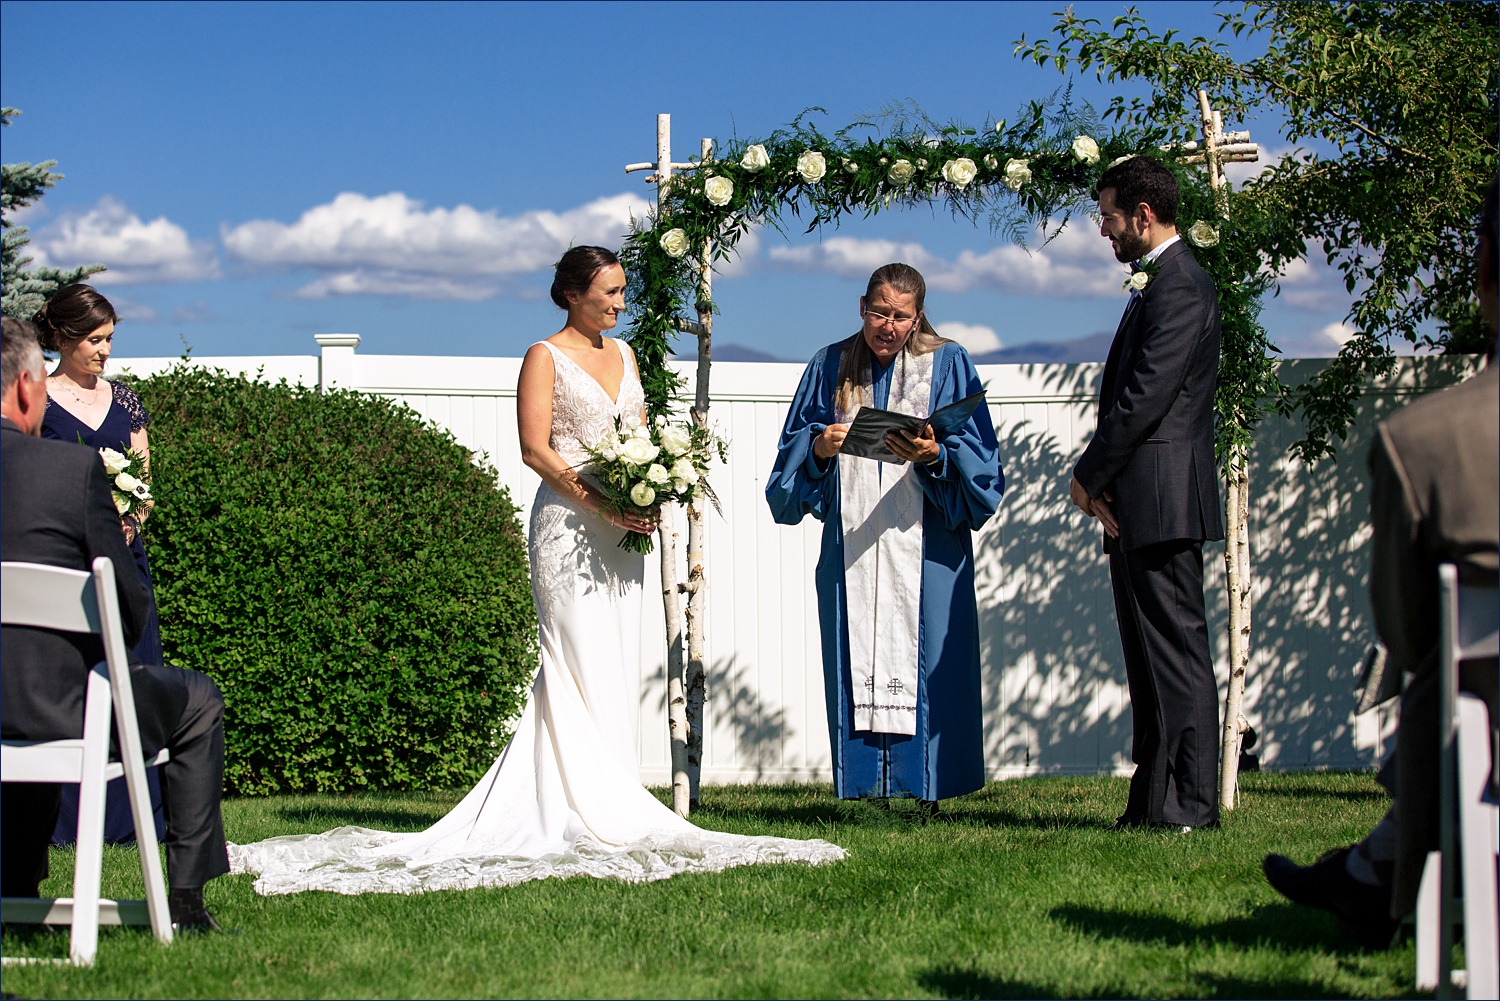 The wedding ceremony of the garden at Mountain View Grand Resort in New Hampshire overlooking the mountains